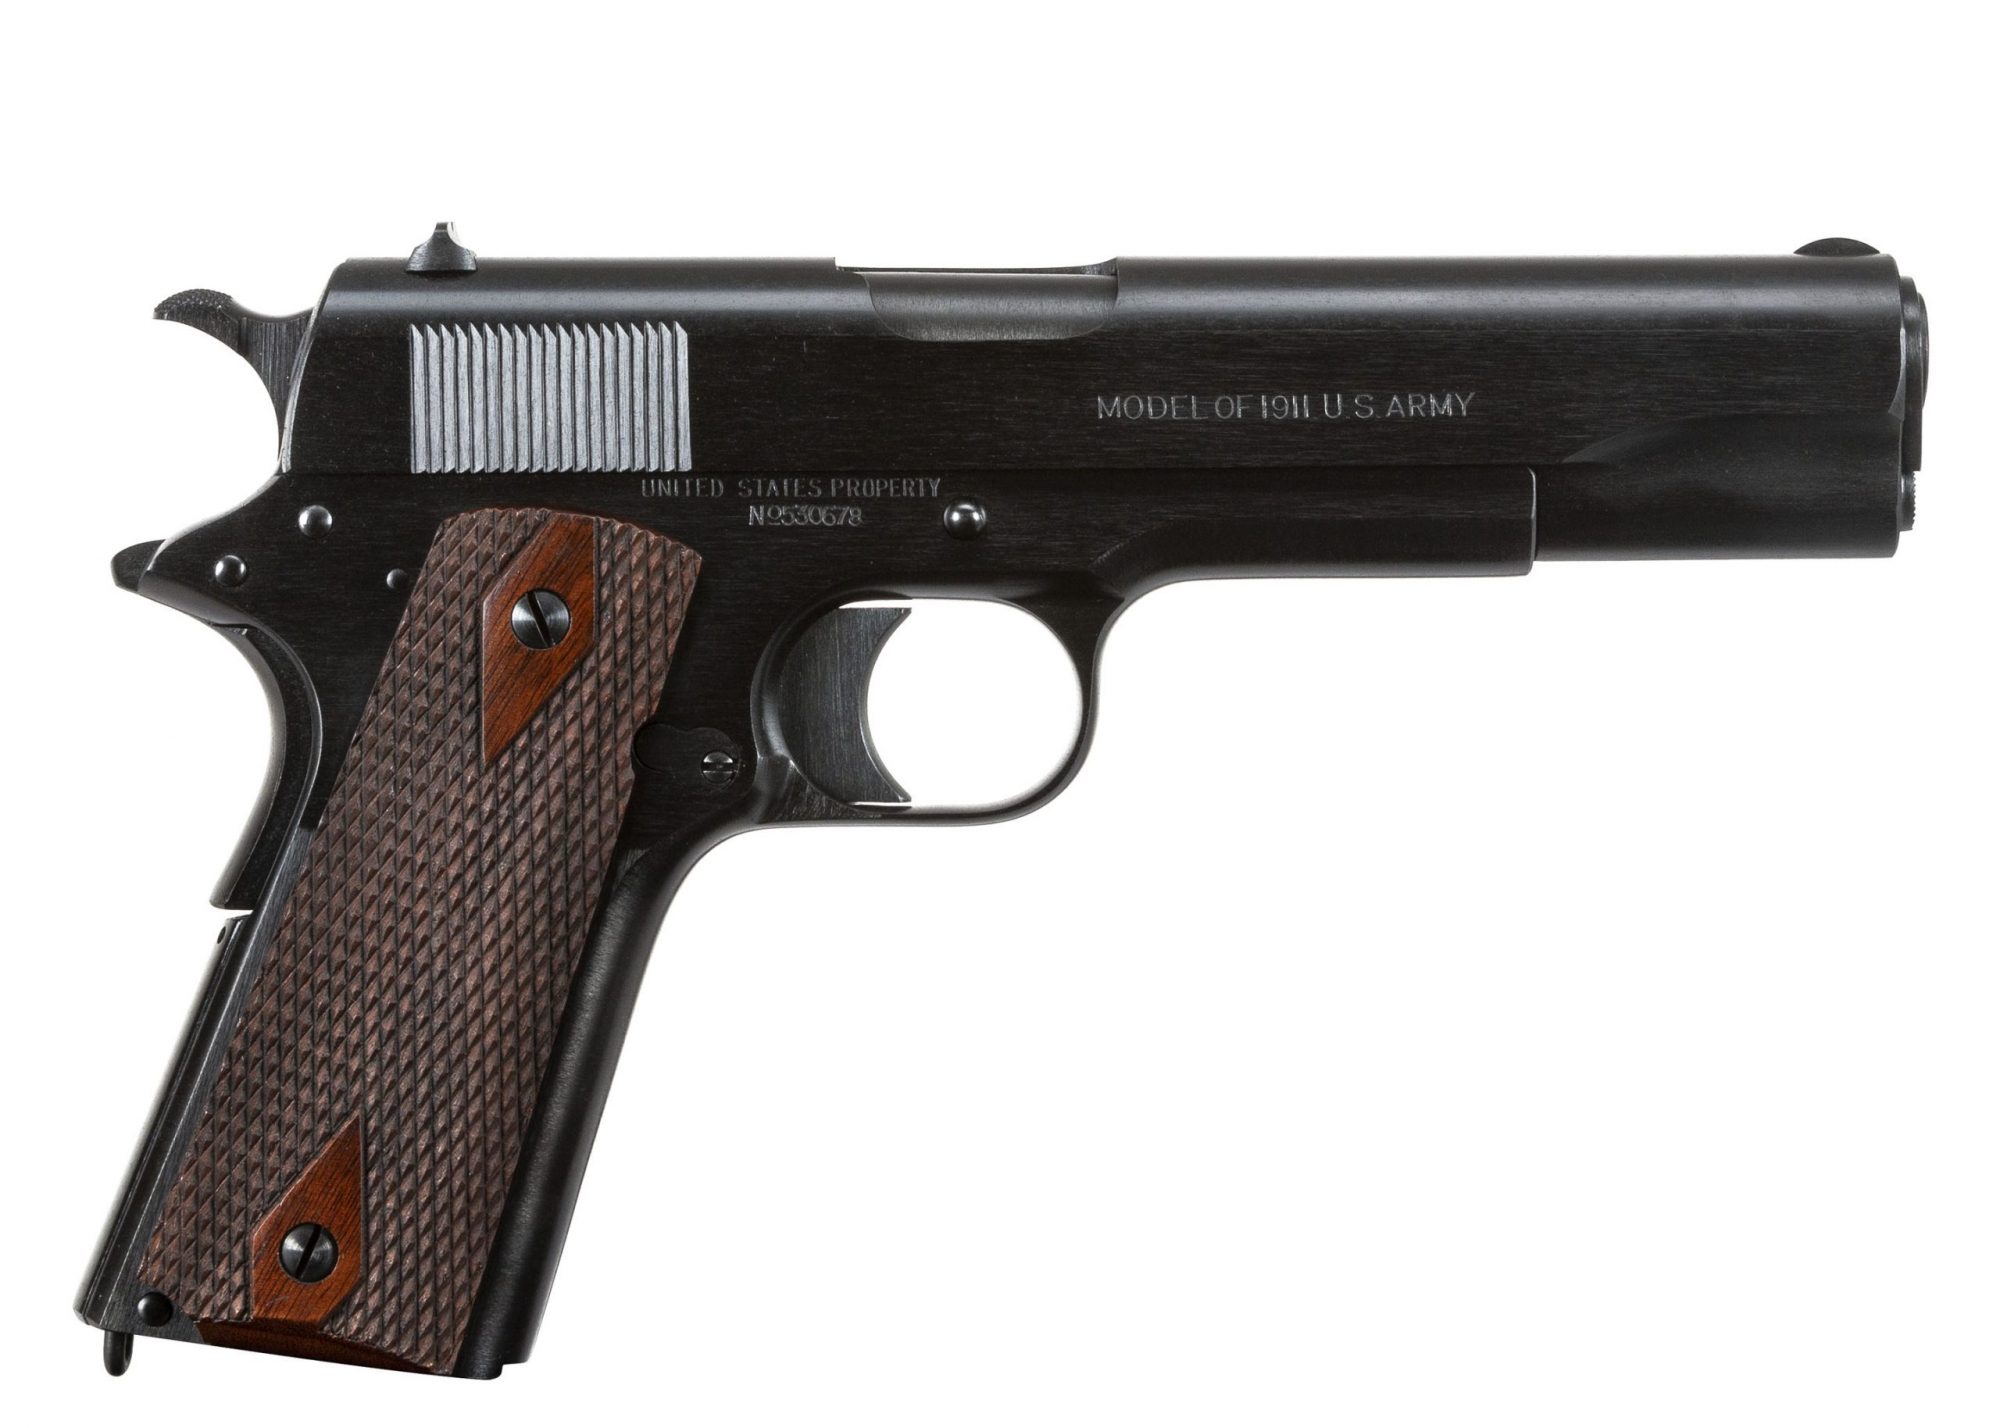 Photo of a restored Colt Model of 1911 U.S. Army from 1918, with correct "Black Army" finish. Restoration and finish work performed by Turnbull Restoration of Bloomfield, NY